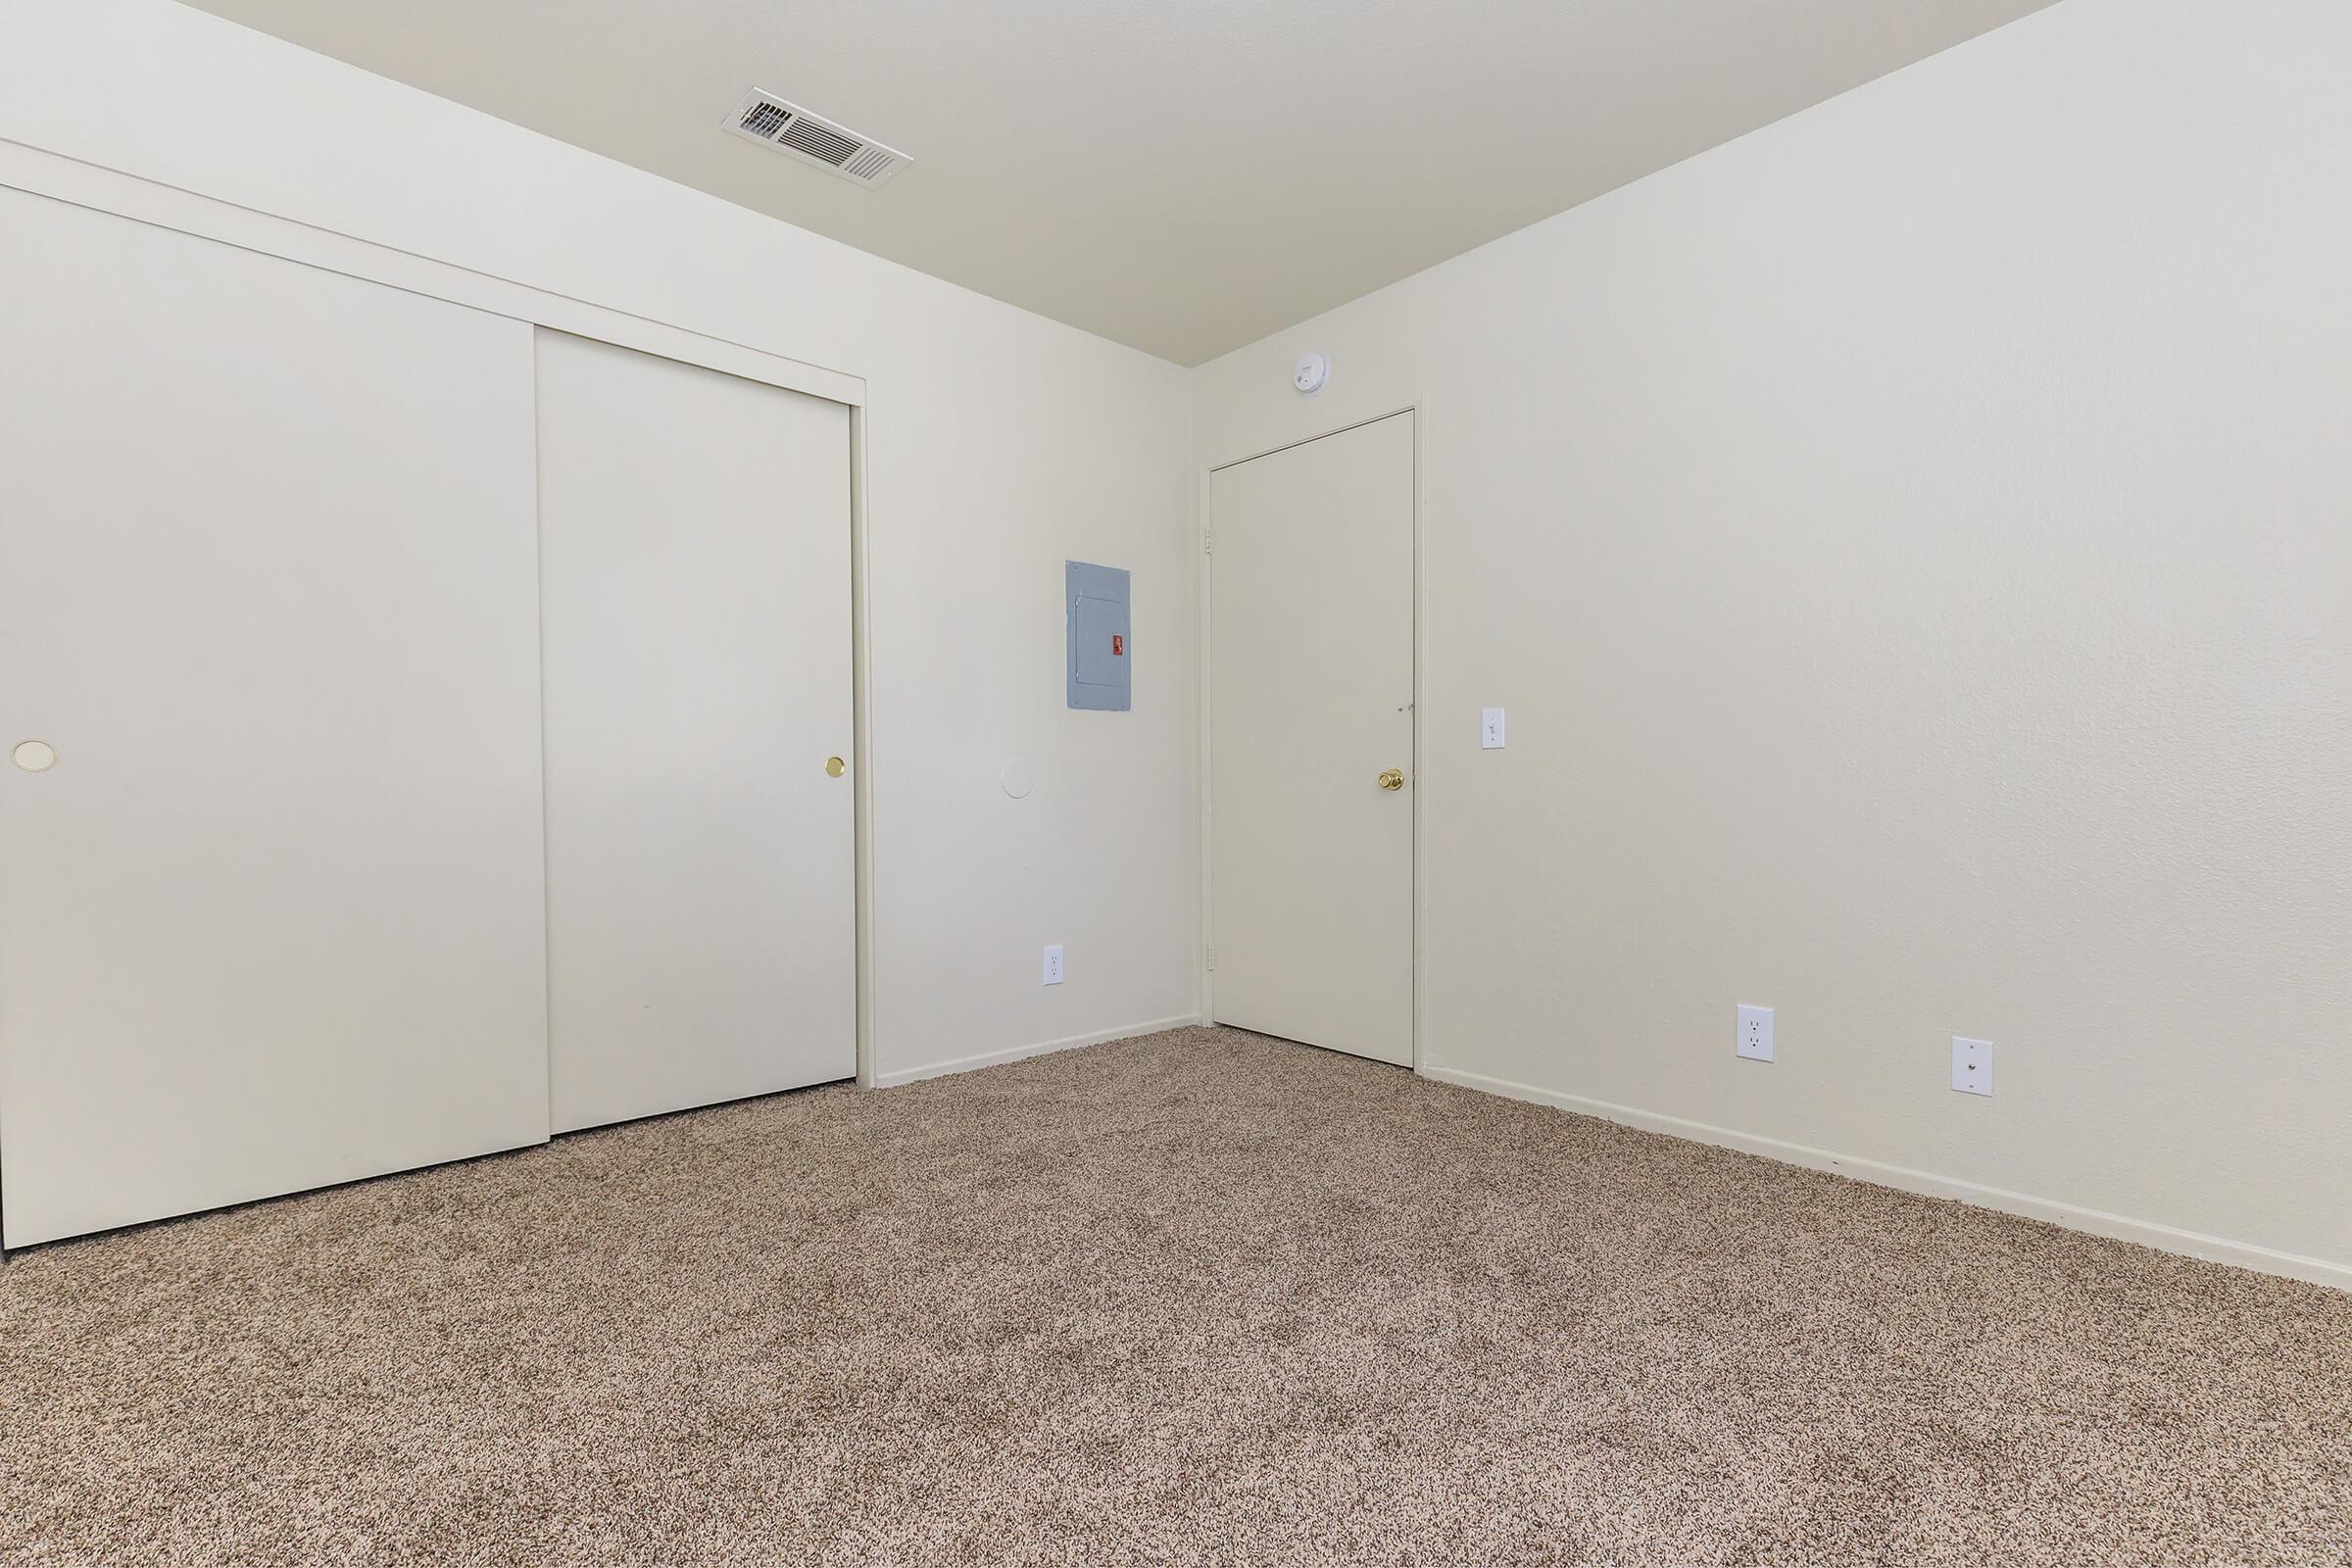 Unfurnished carpeted bedroom with closed sliding closet doors